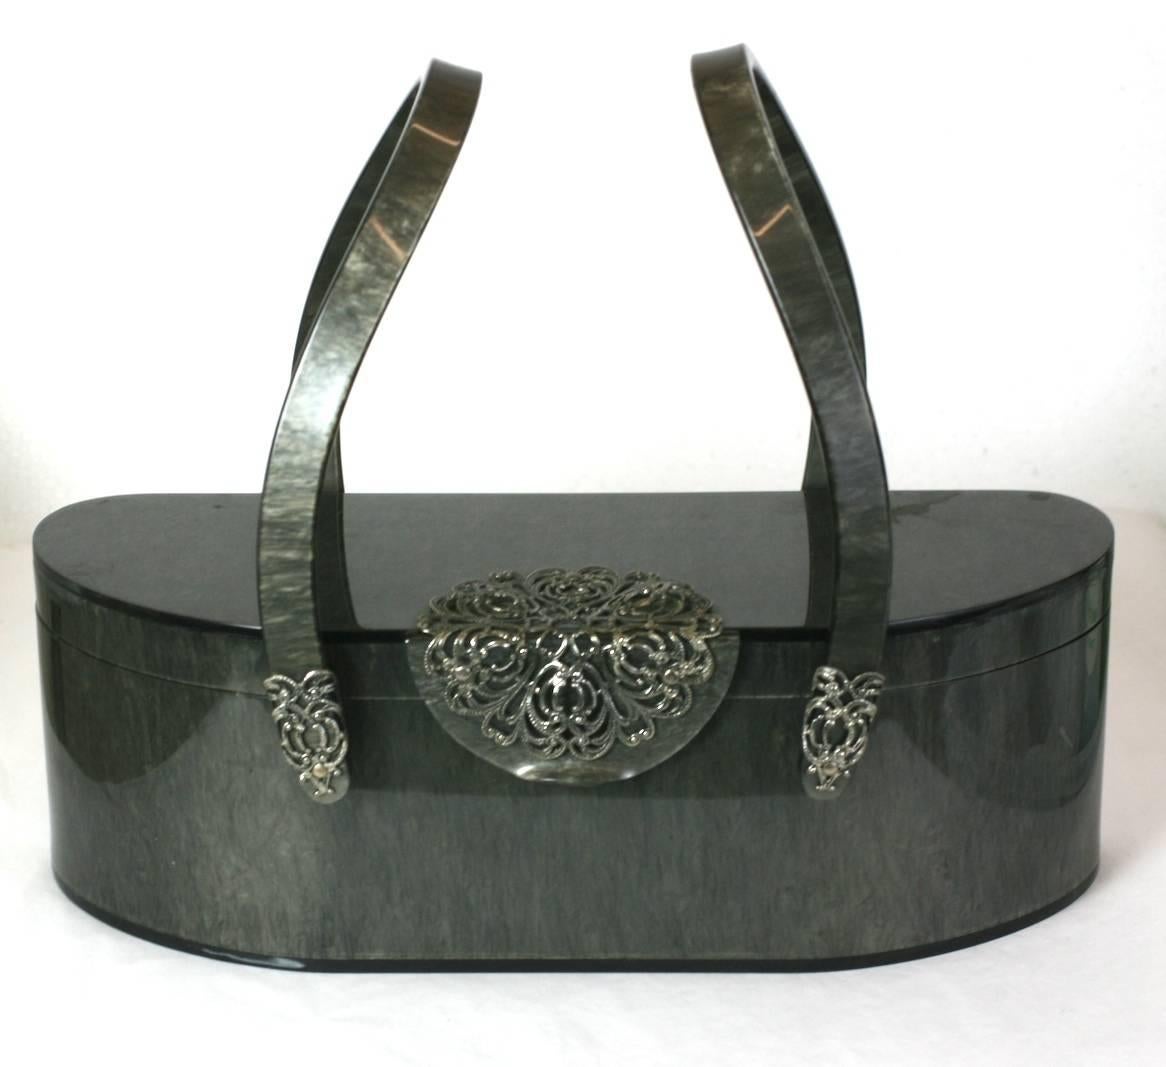 Marbleized Gray Bakelite Purse from the 1950's. Unusual shape with curved handles decorated with silvered filigree accents. Interior mirror within lid. 1950's USA. 

11" x 3.5" x 3.75"high. Handle 8" in height. 